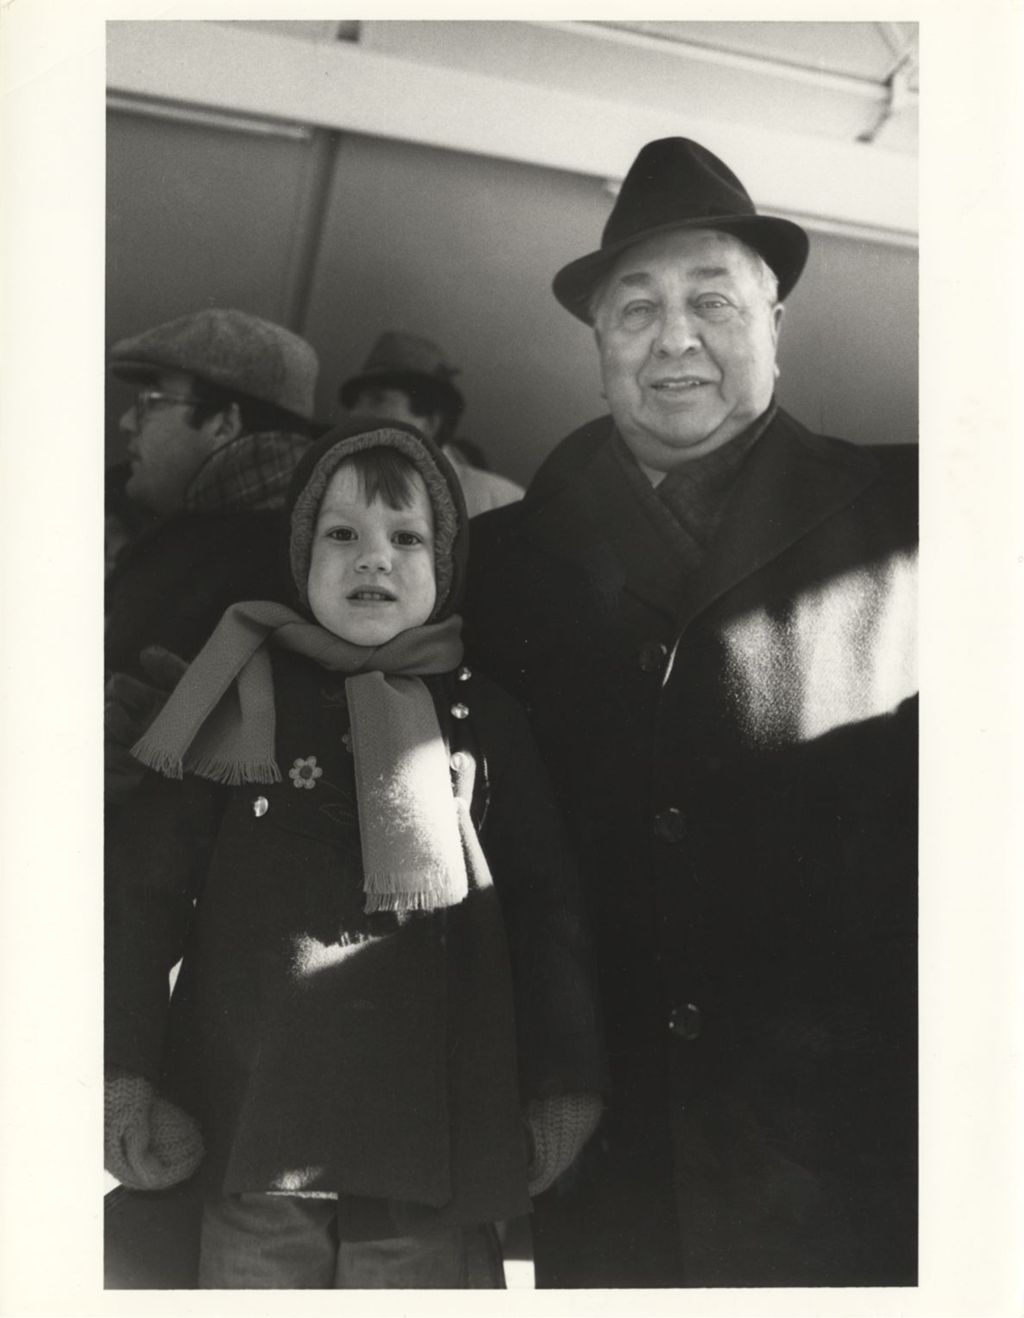 Miniature of Richard J. Daley with a grandchild